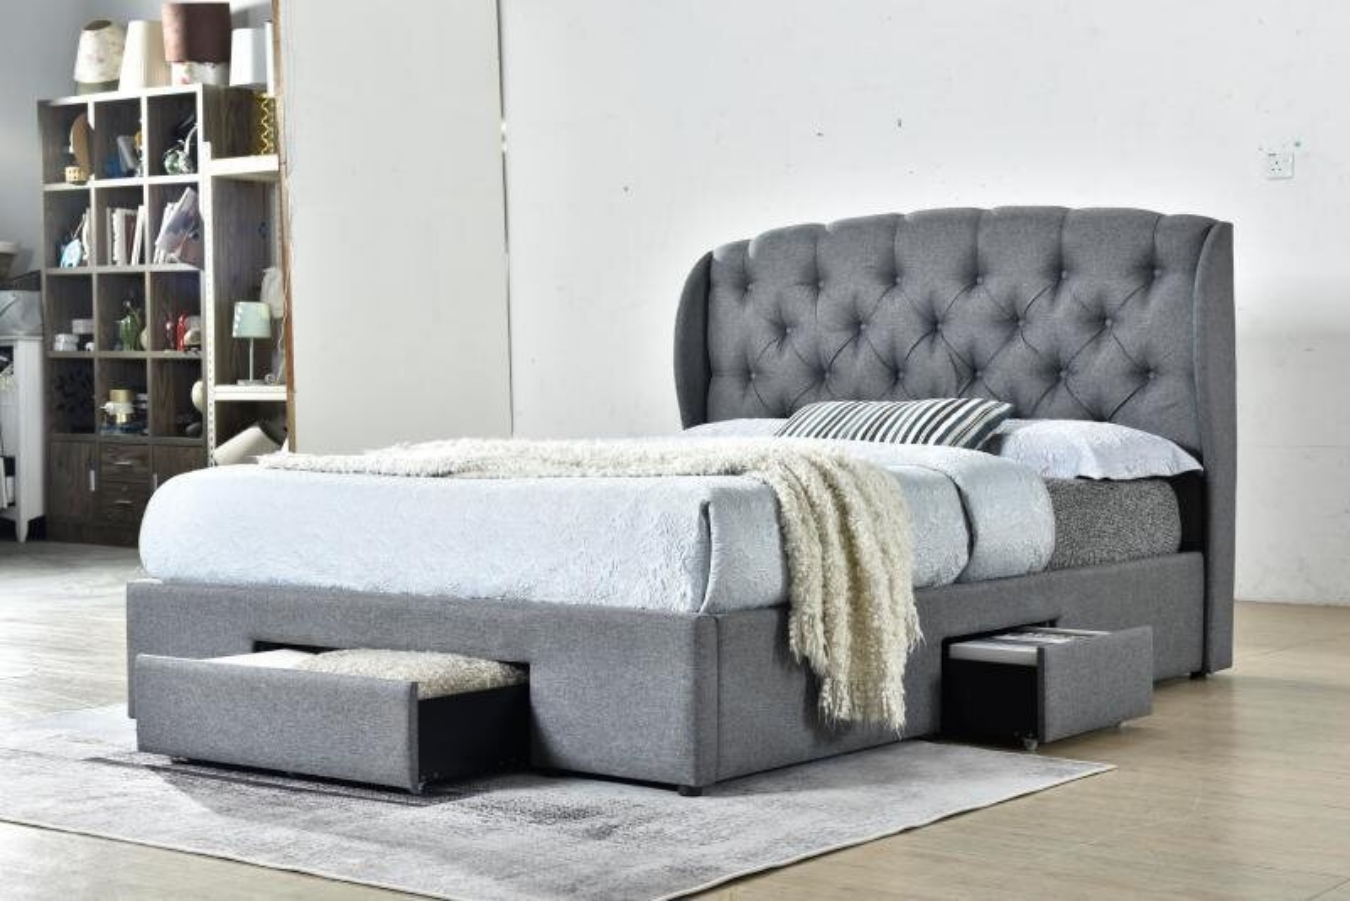 Simply stunning with button tufting and wing detail, with HENRY DOUBLE BED WITH DRAWERS